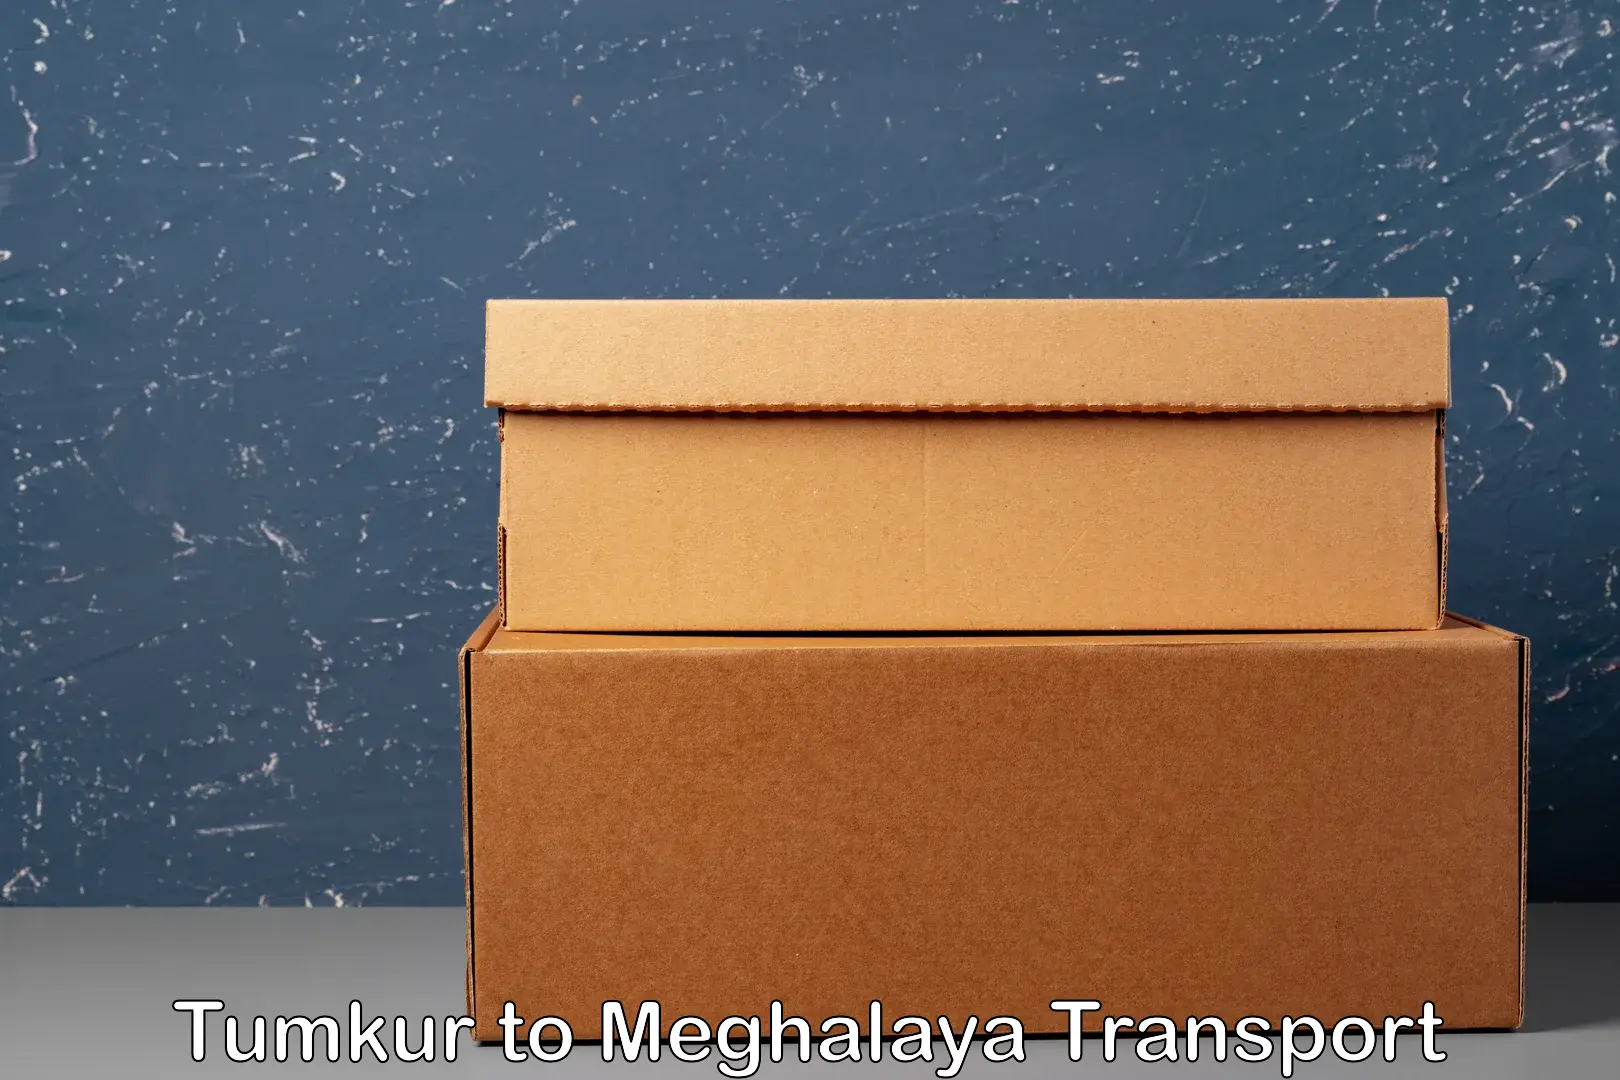 Goods delivery service Tumkur to Shillong